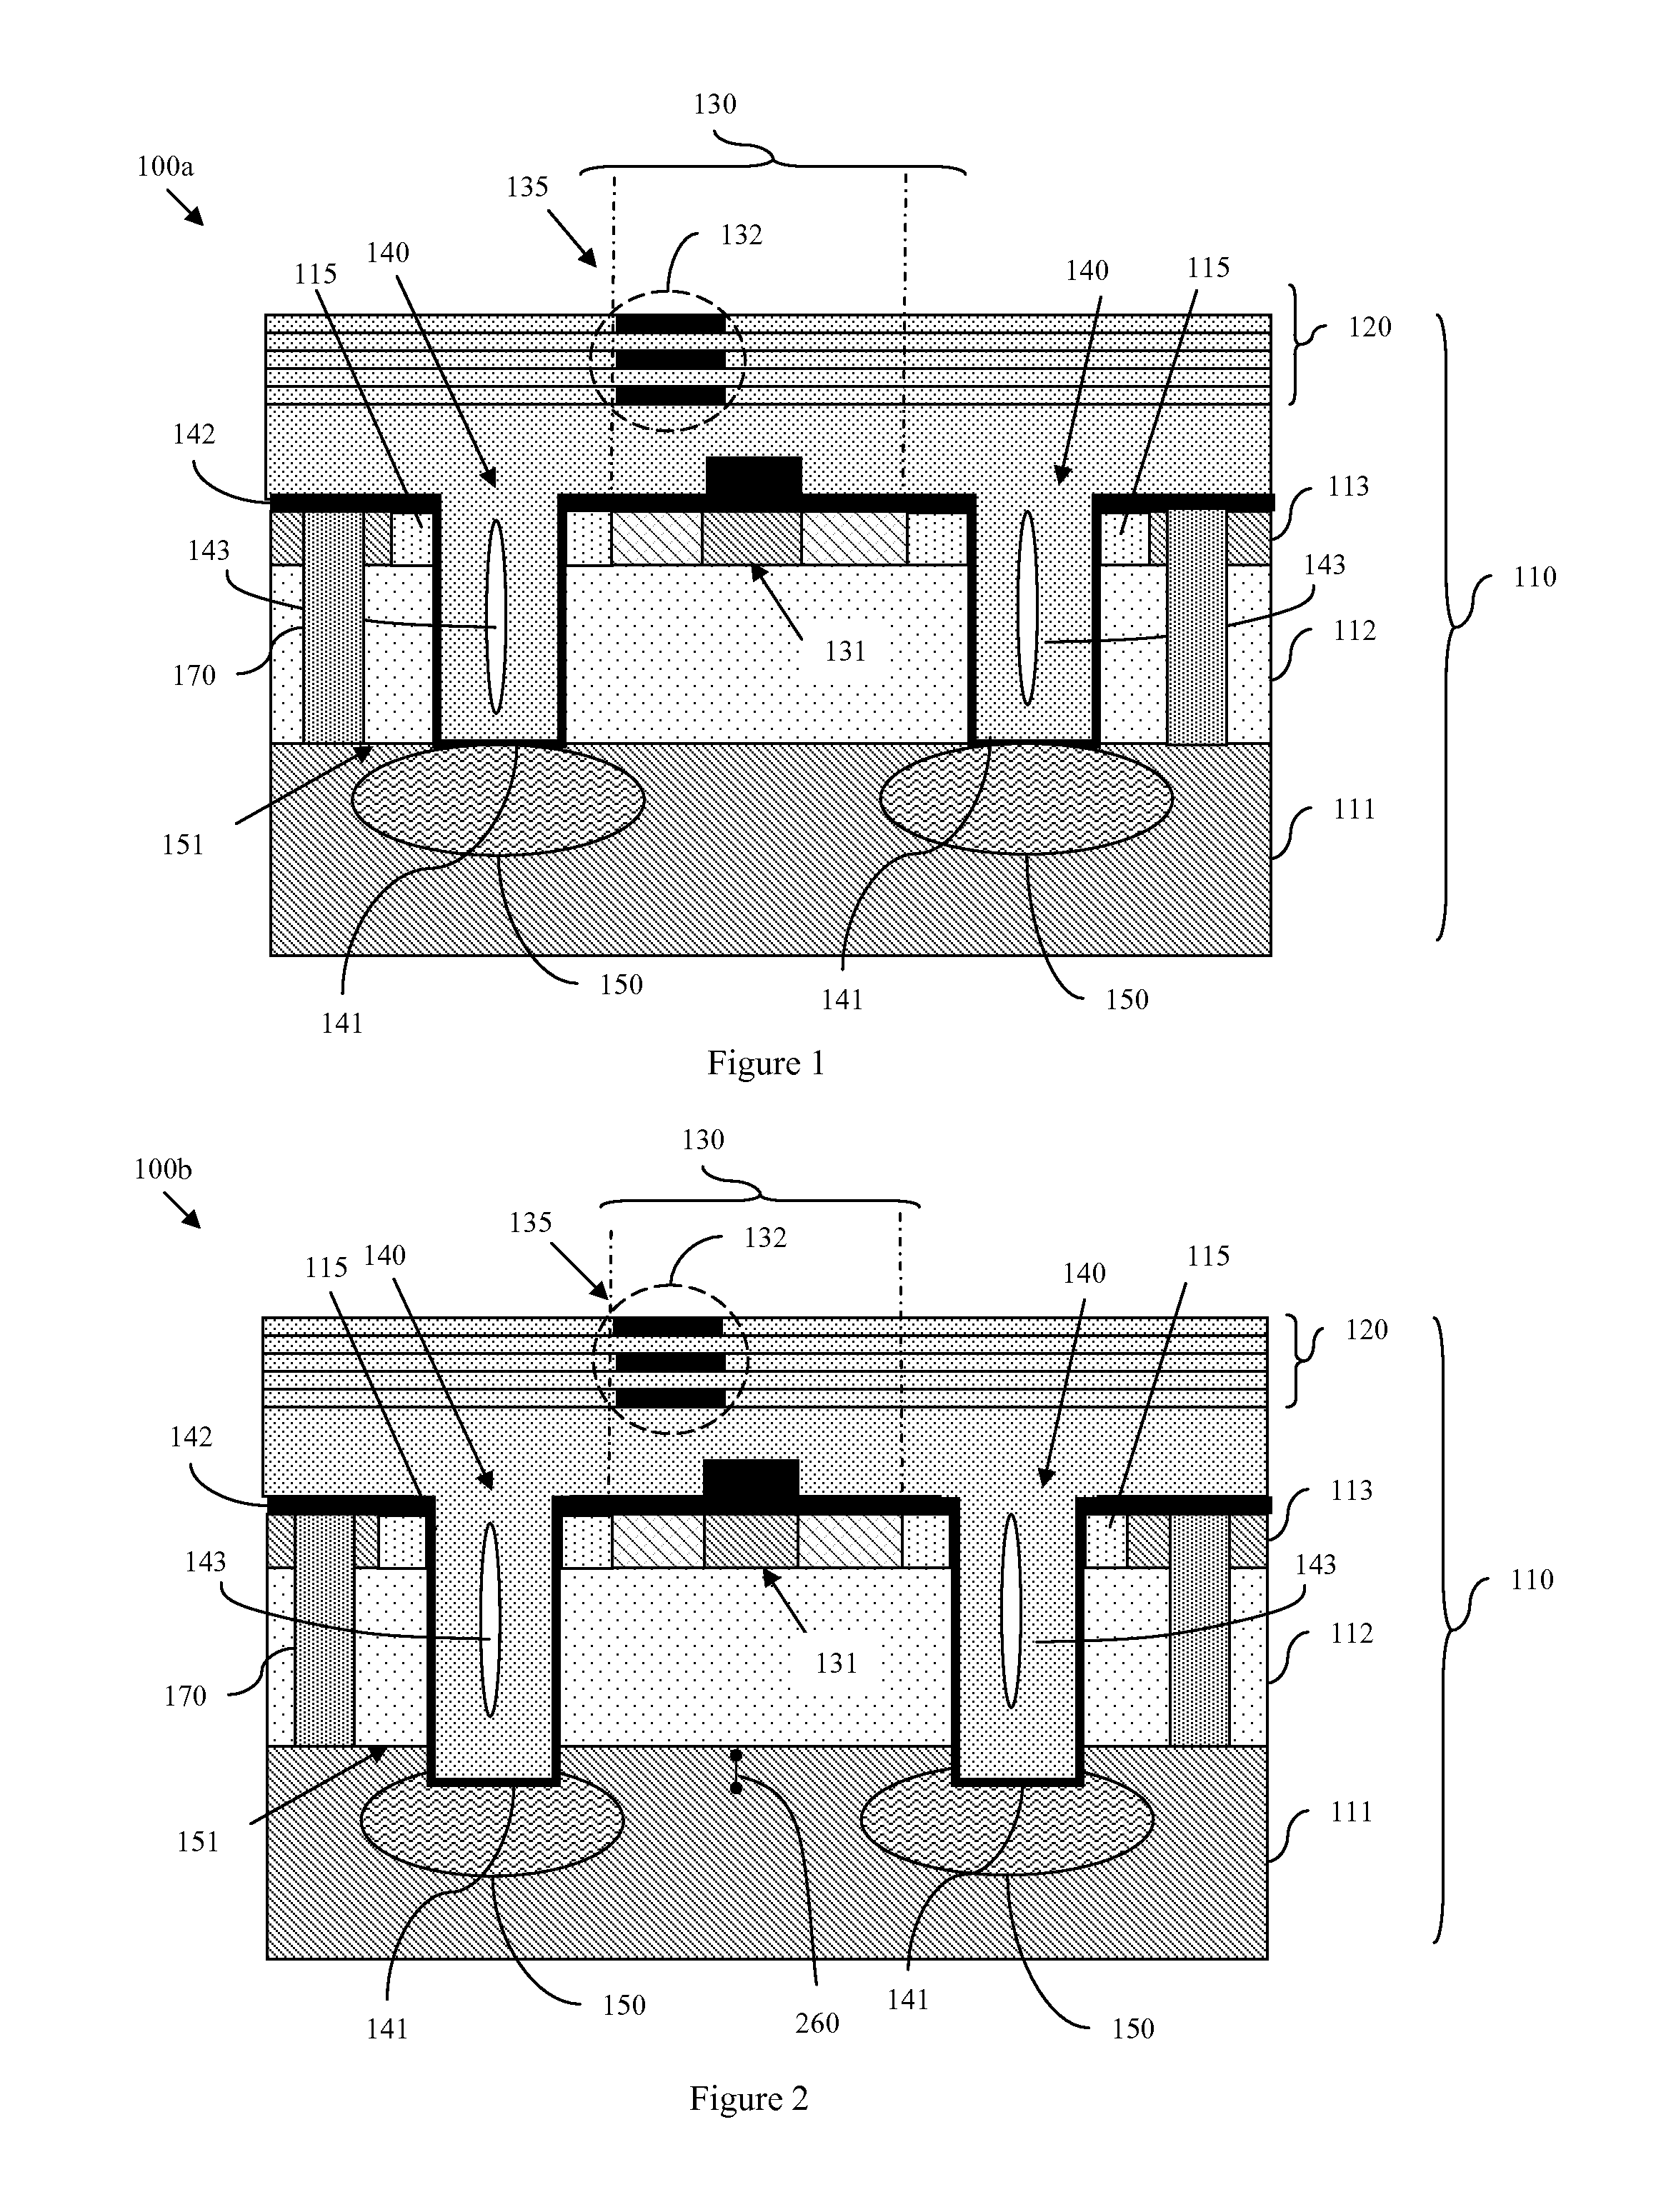 Integrated Circuit Structure, Design Structure, and Method Having Improved Isolation and Harmonics